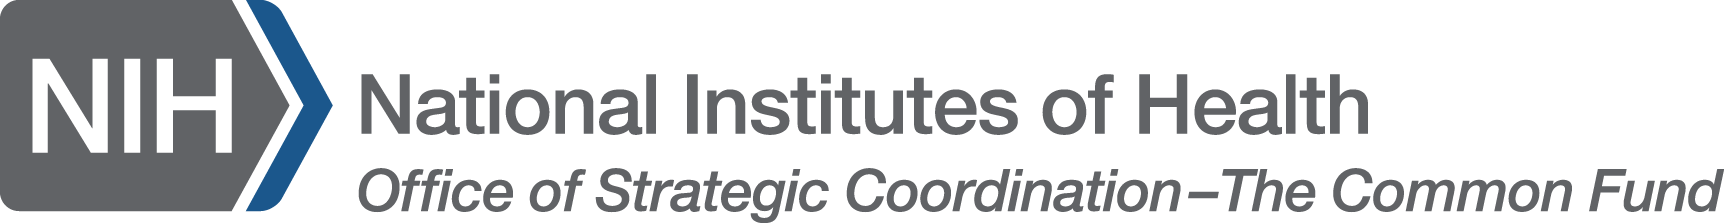 National Institutes of health - Office of Strategic Coordination